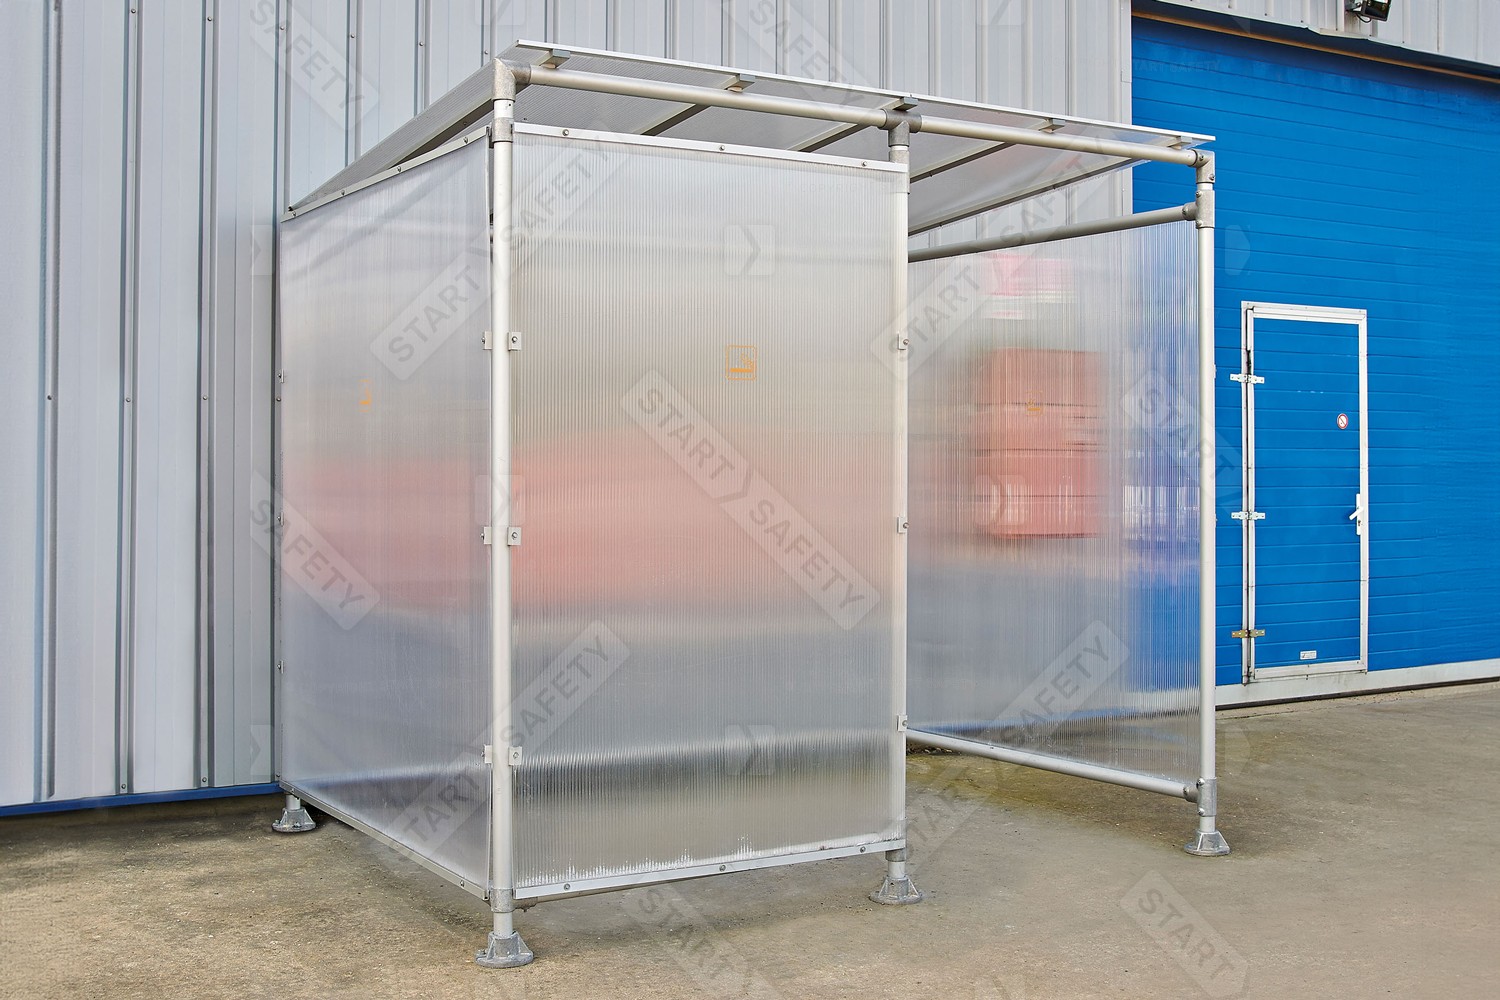 Procity Economy Smoking Shelter Installed In Front Ofc Warehouse